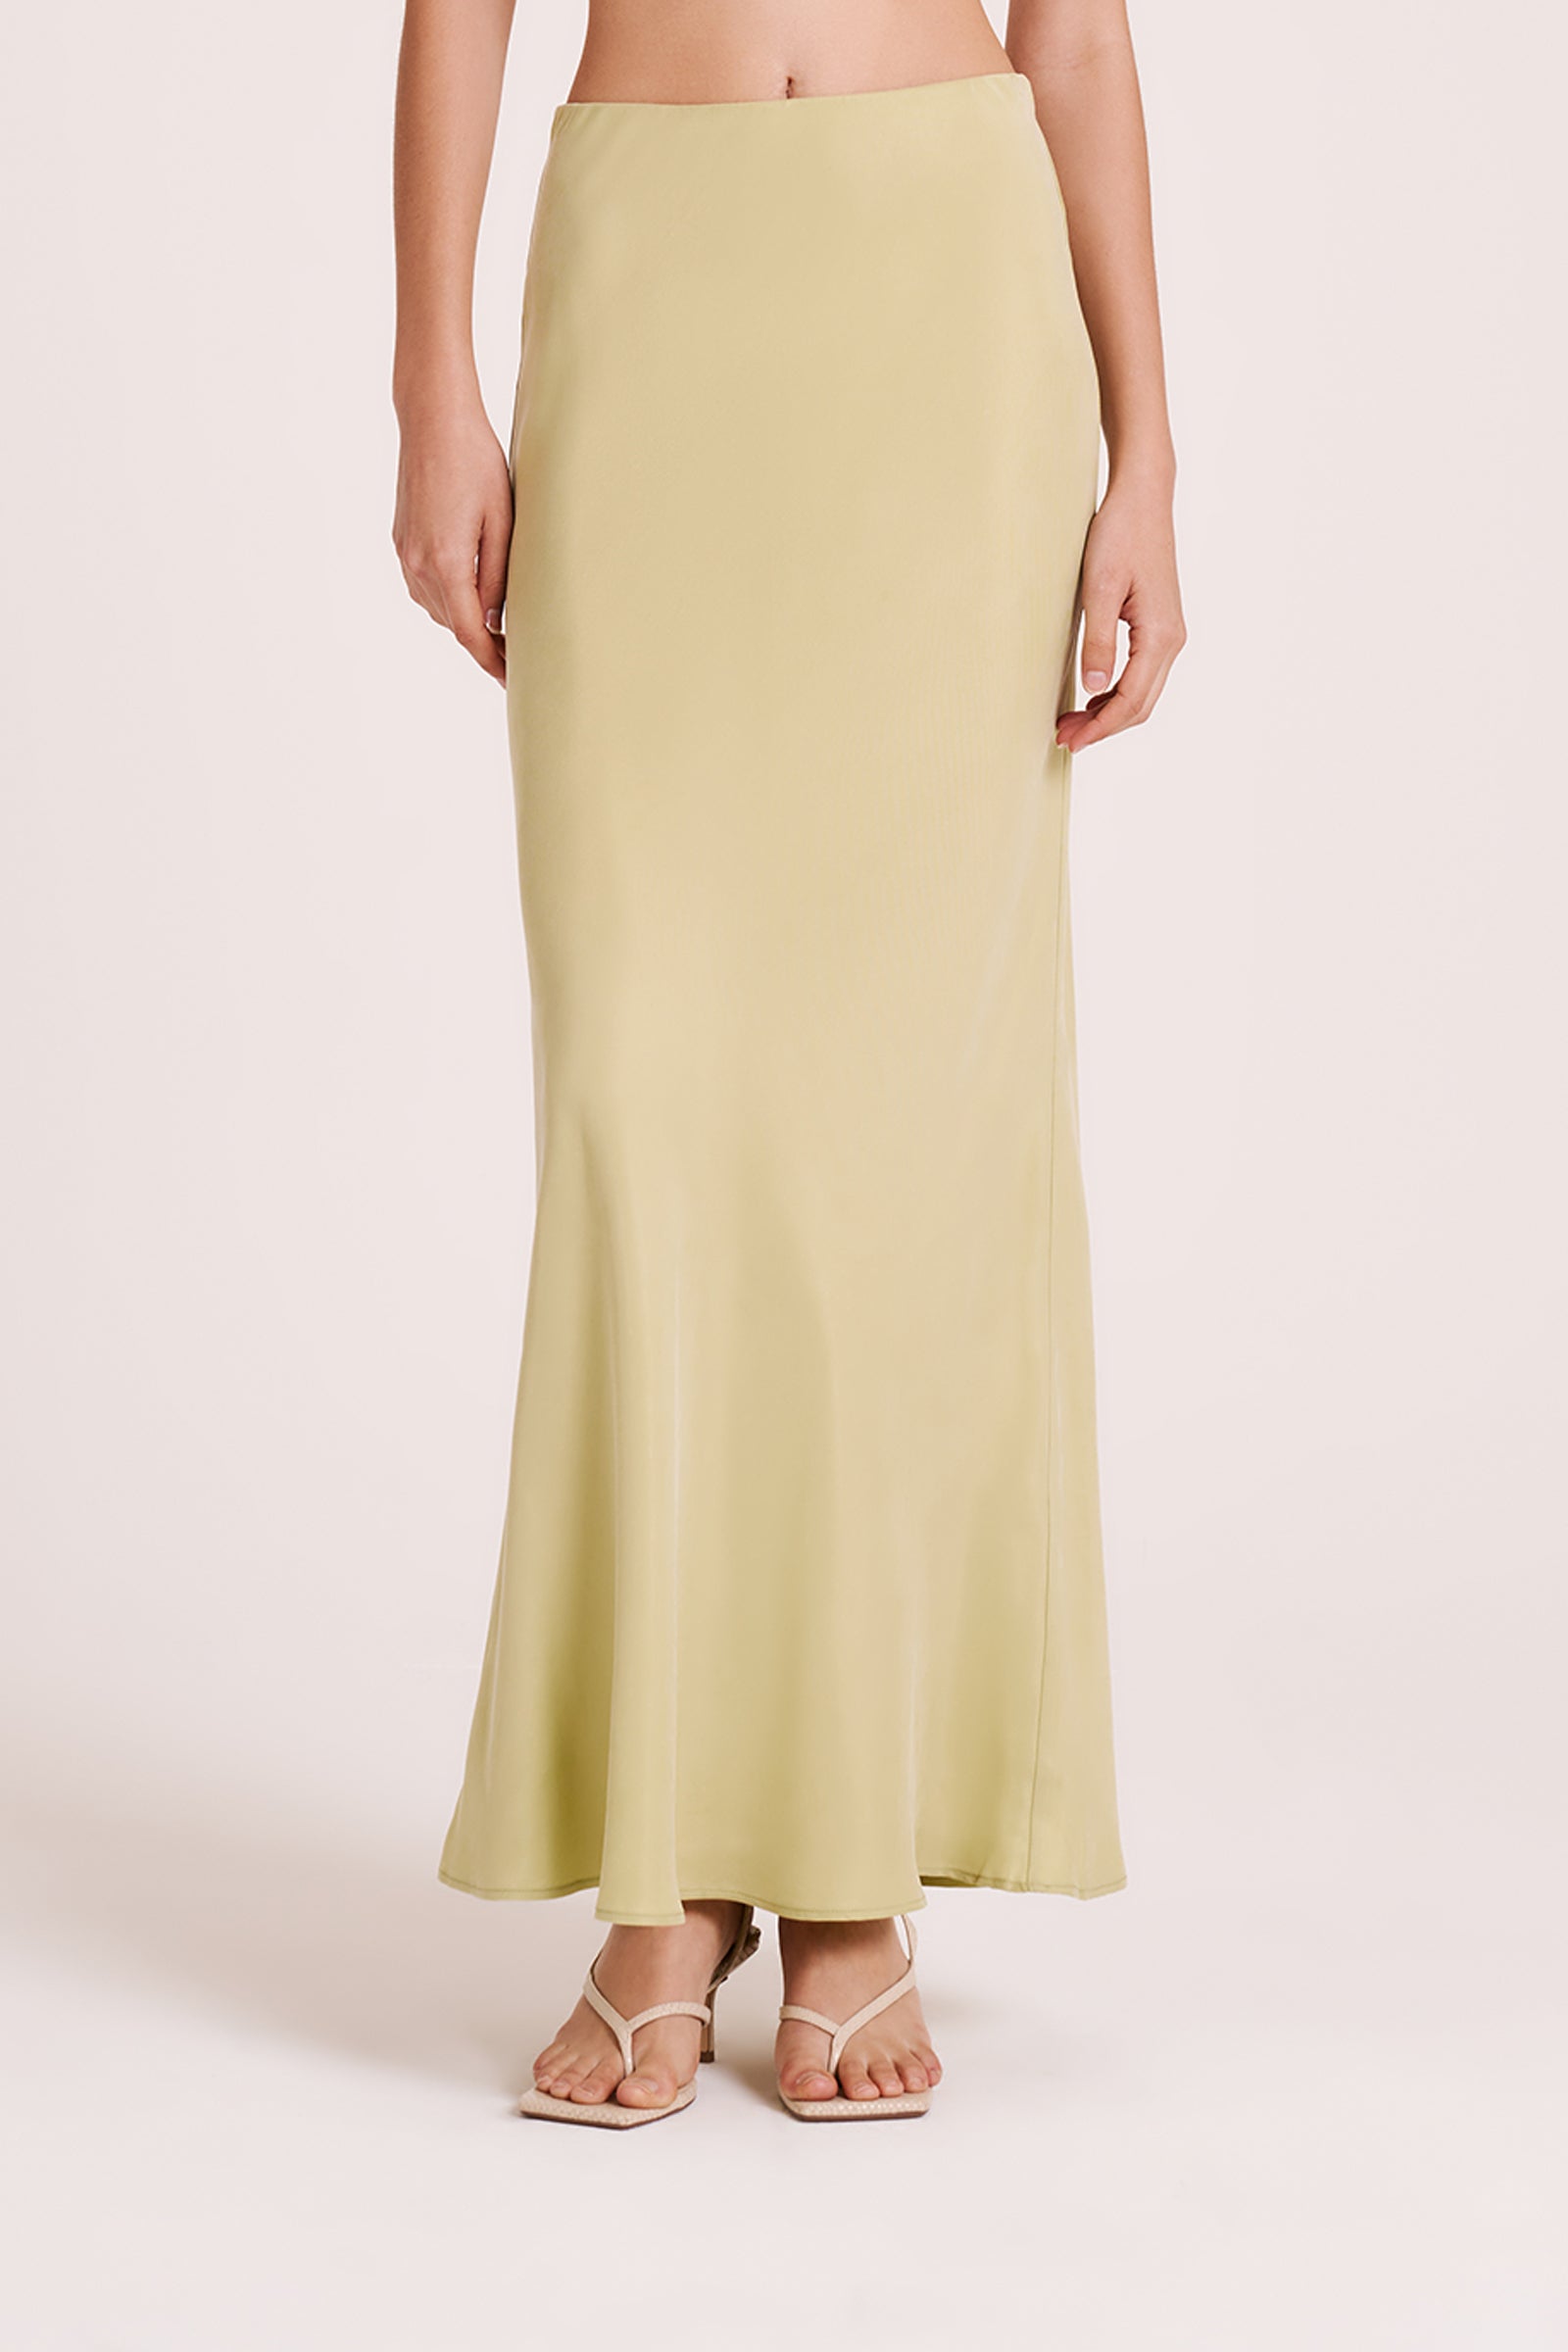 Ines Cupro Skirt Lime 